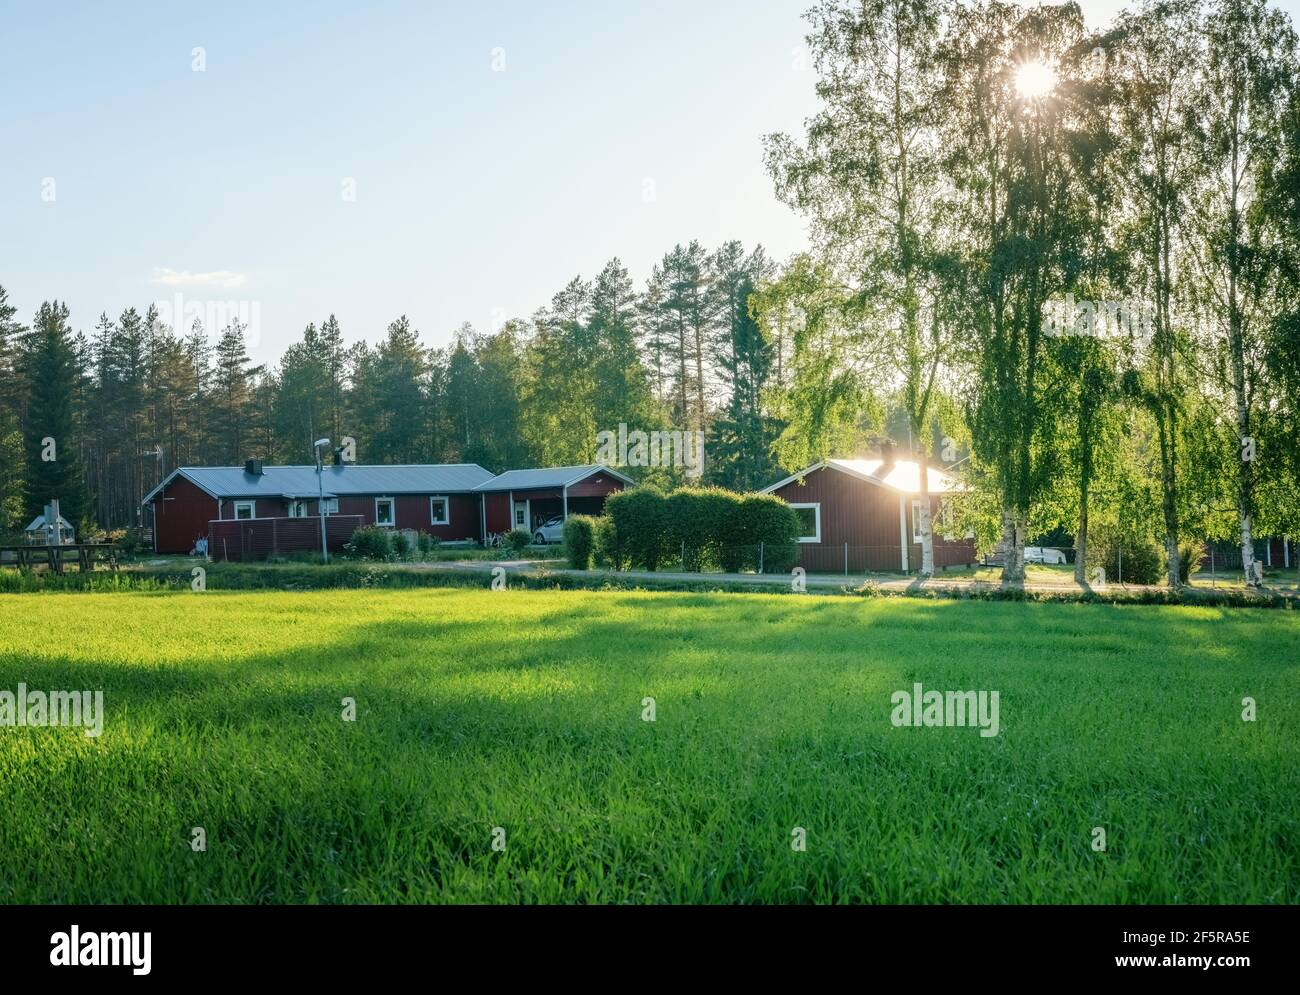 Strong Sun shines through birch crown and reflects from the roof of wooden red cabin, young green wheat or oat field in front of small countryside Swe Stock Photo